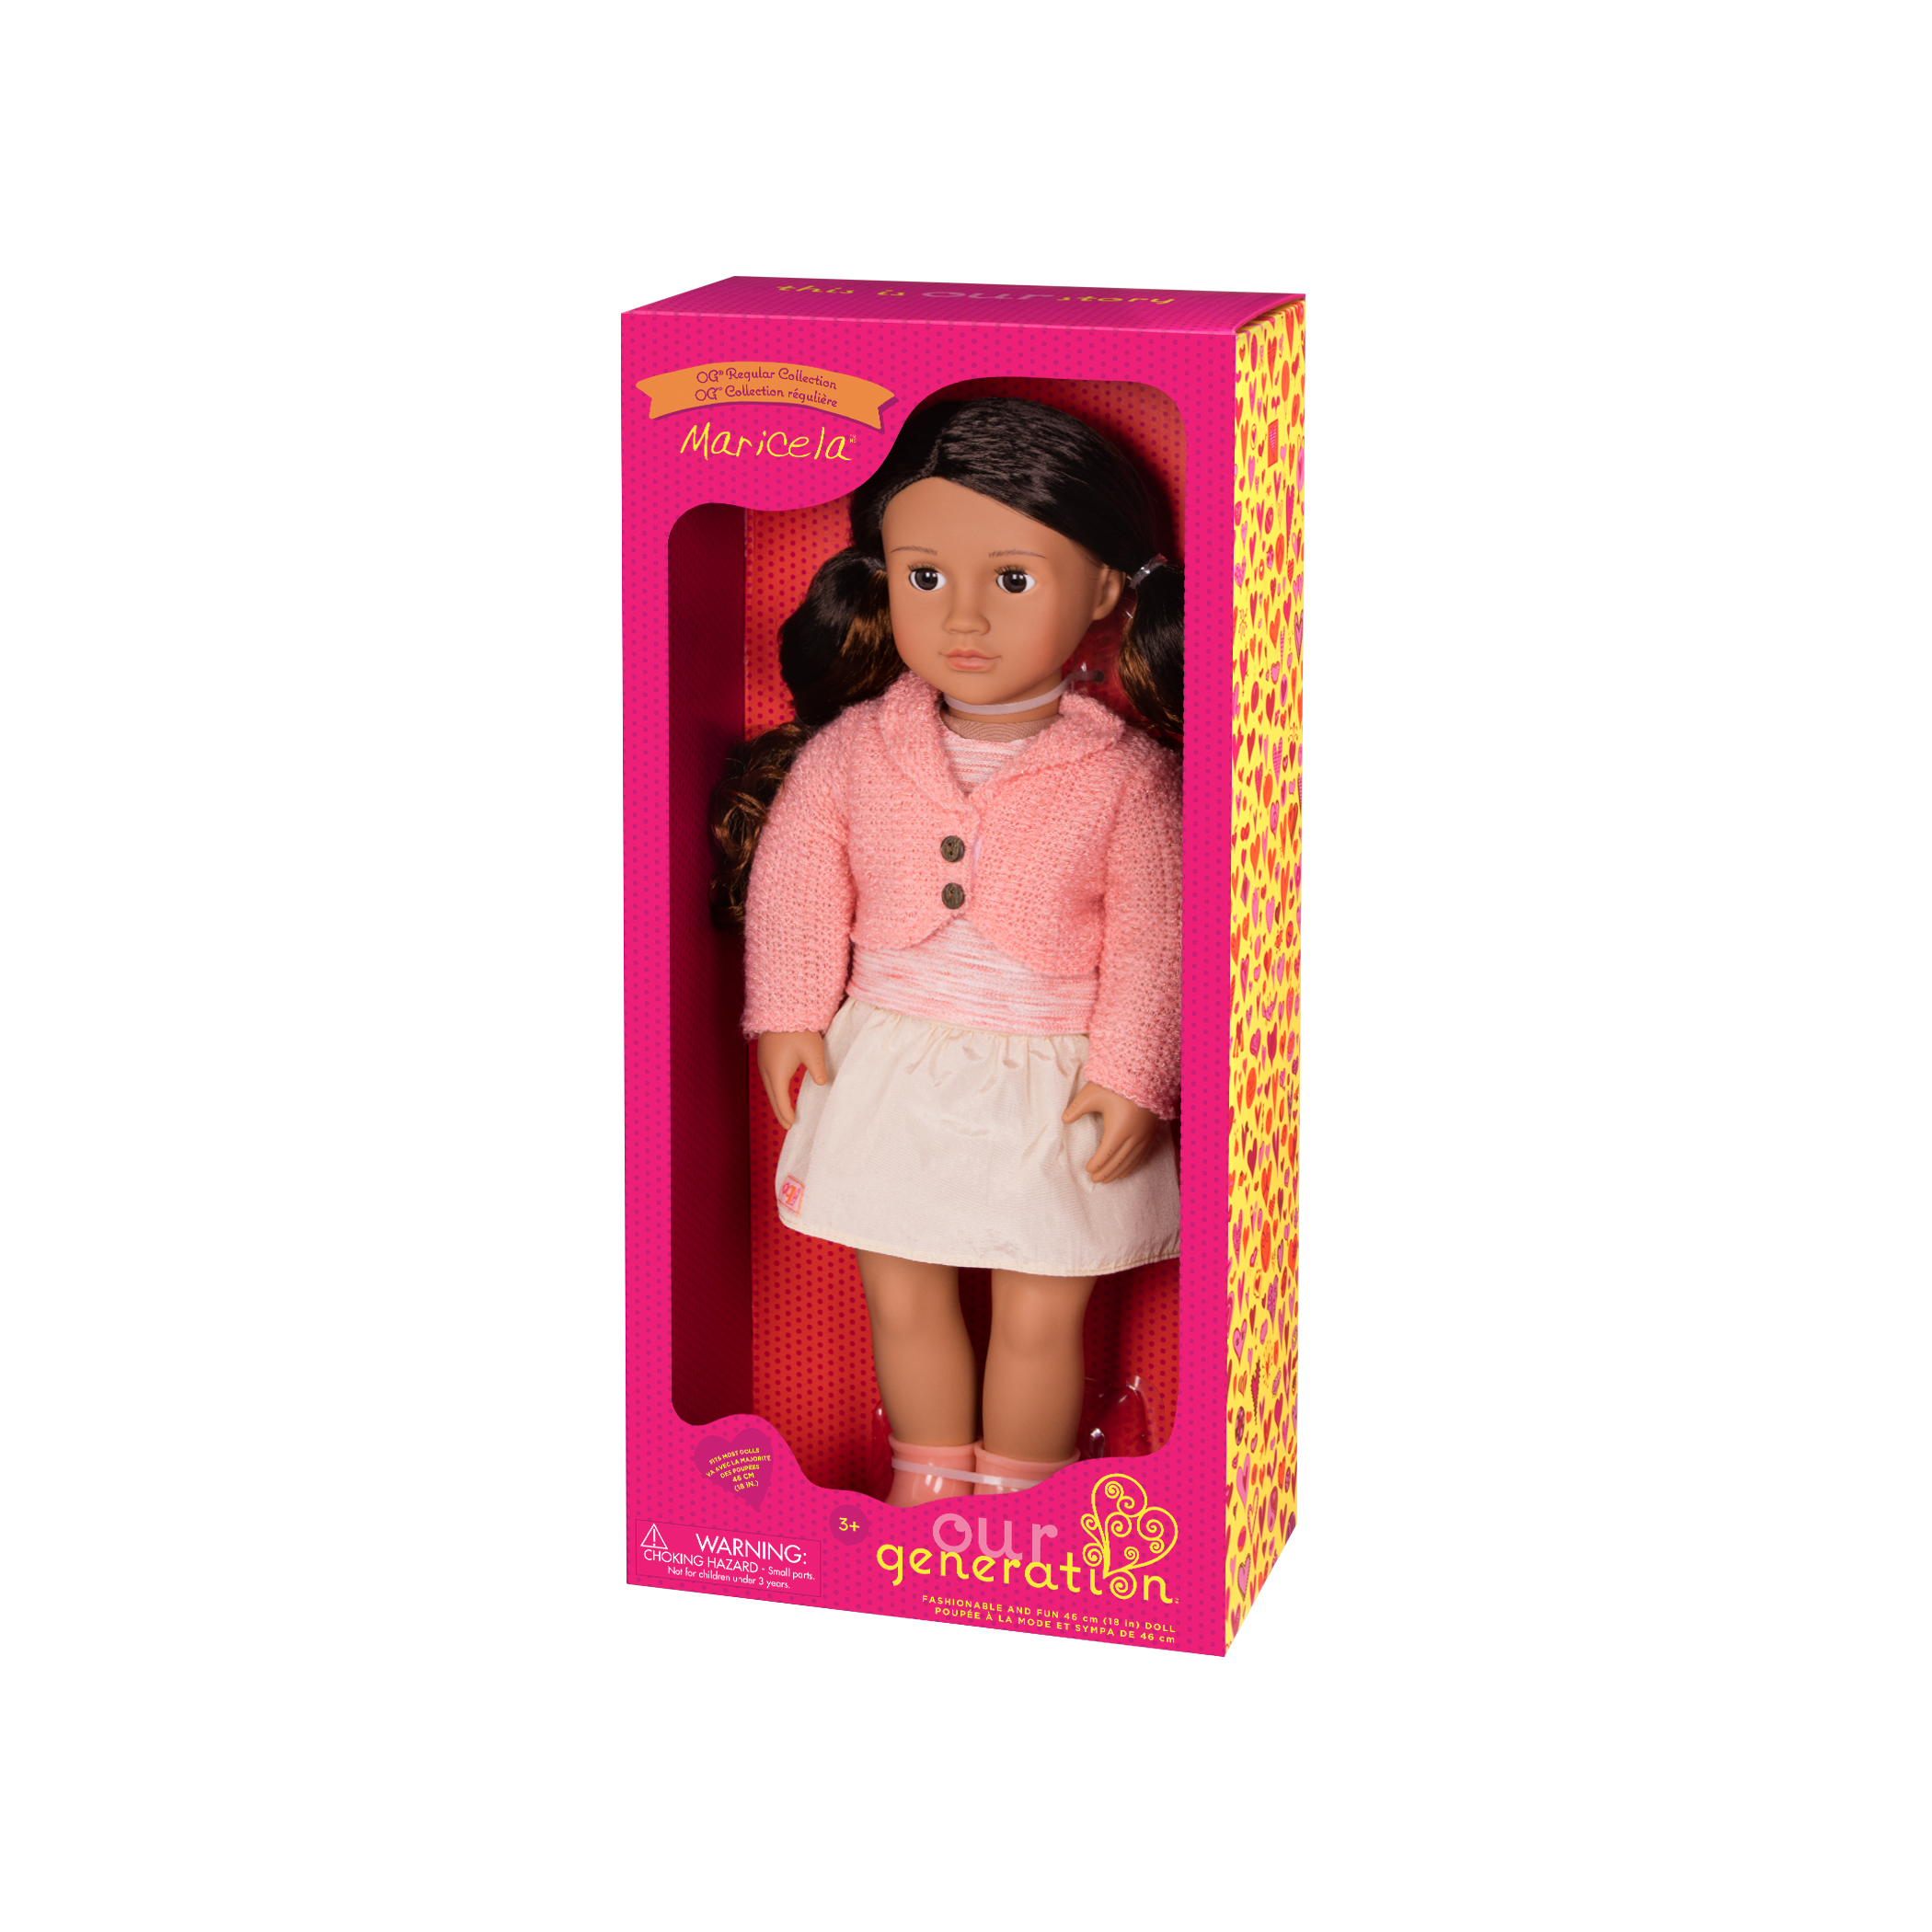 18-inch doll with dark-brown hair, auburn highlights and brown eyes